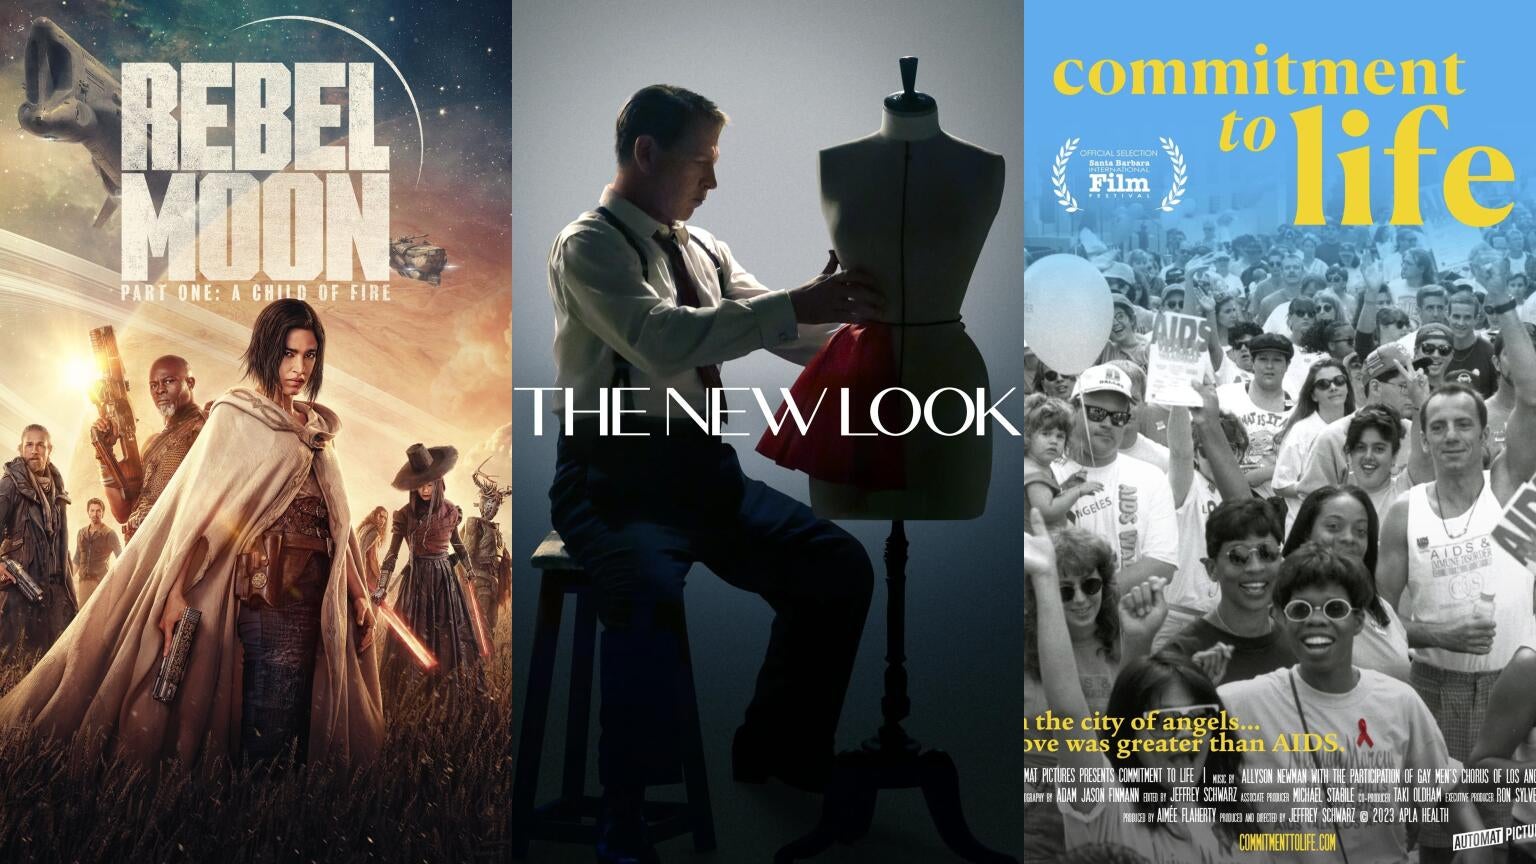 Movie posters for "Rebel Moon - Part One: A Child of Fire," "The New Look," and "Commitment to Life"